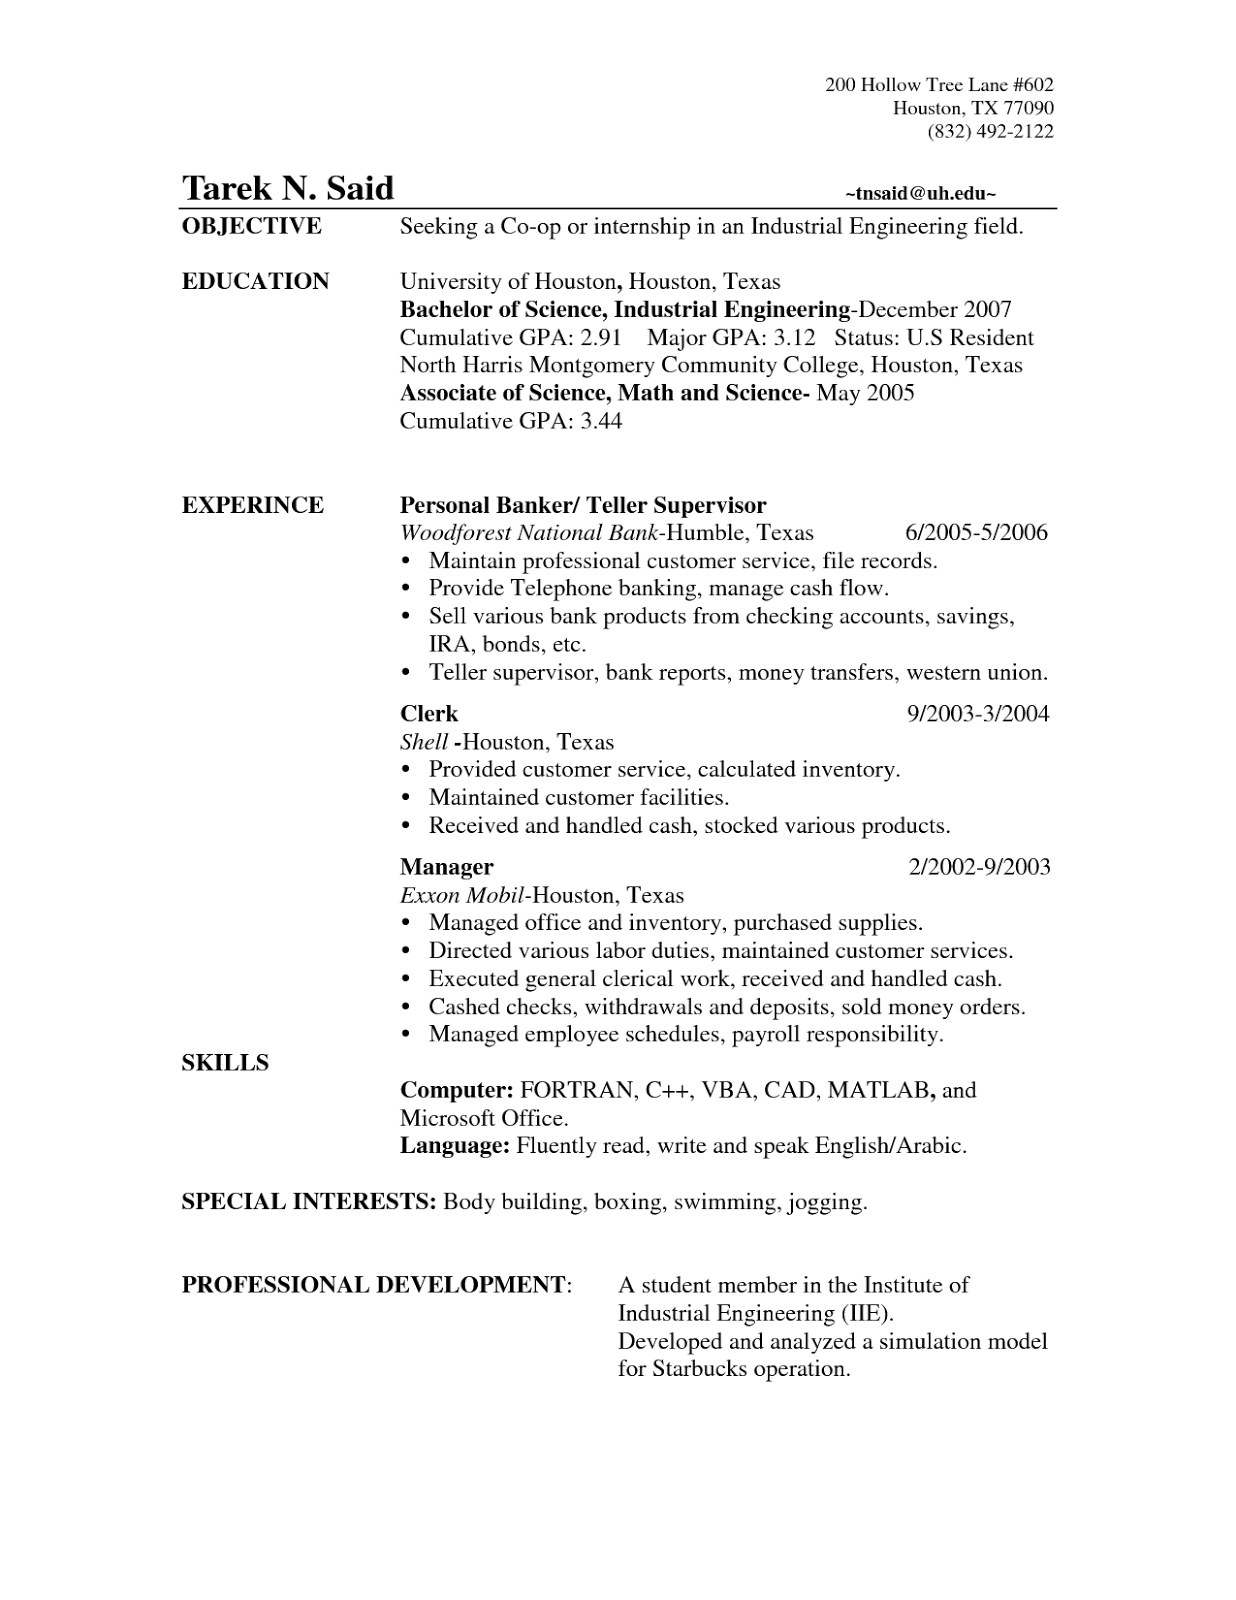 Electrician resume objective